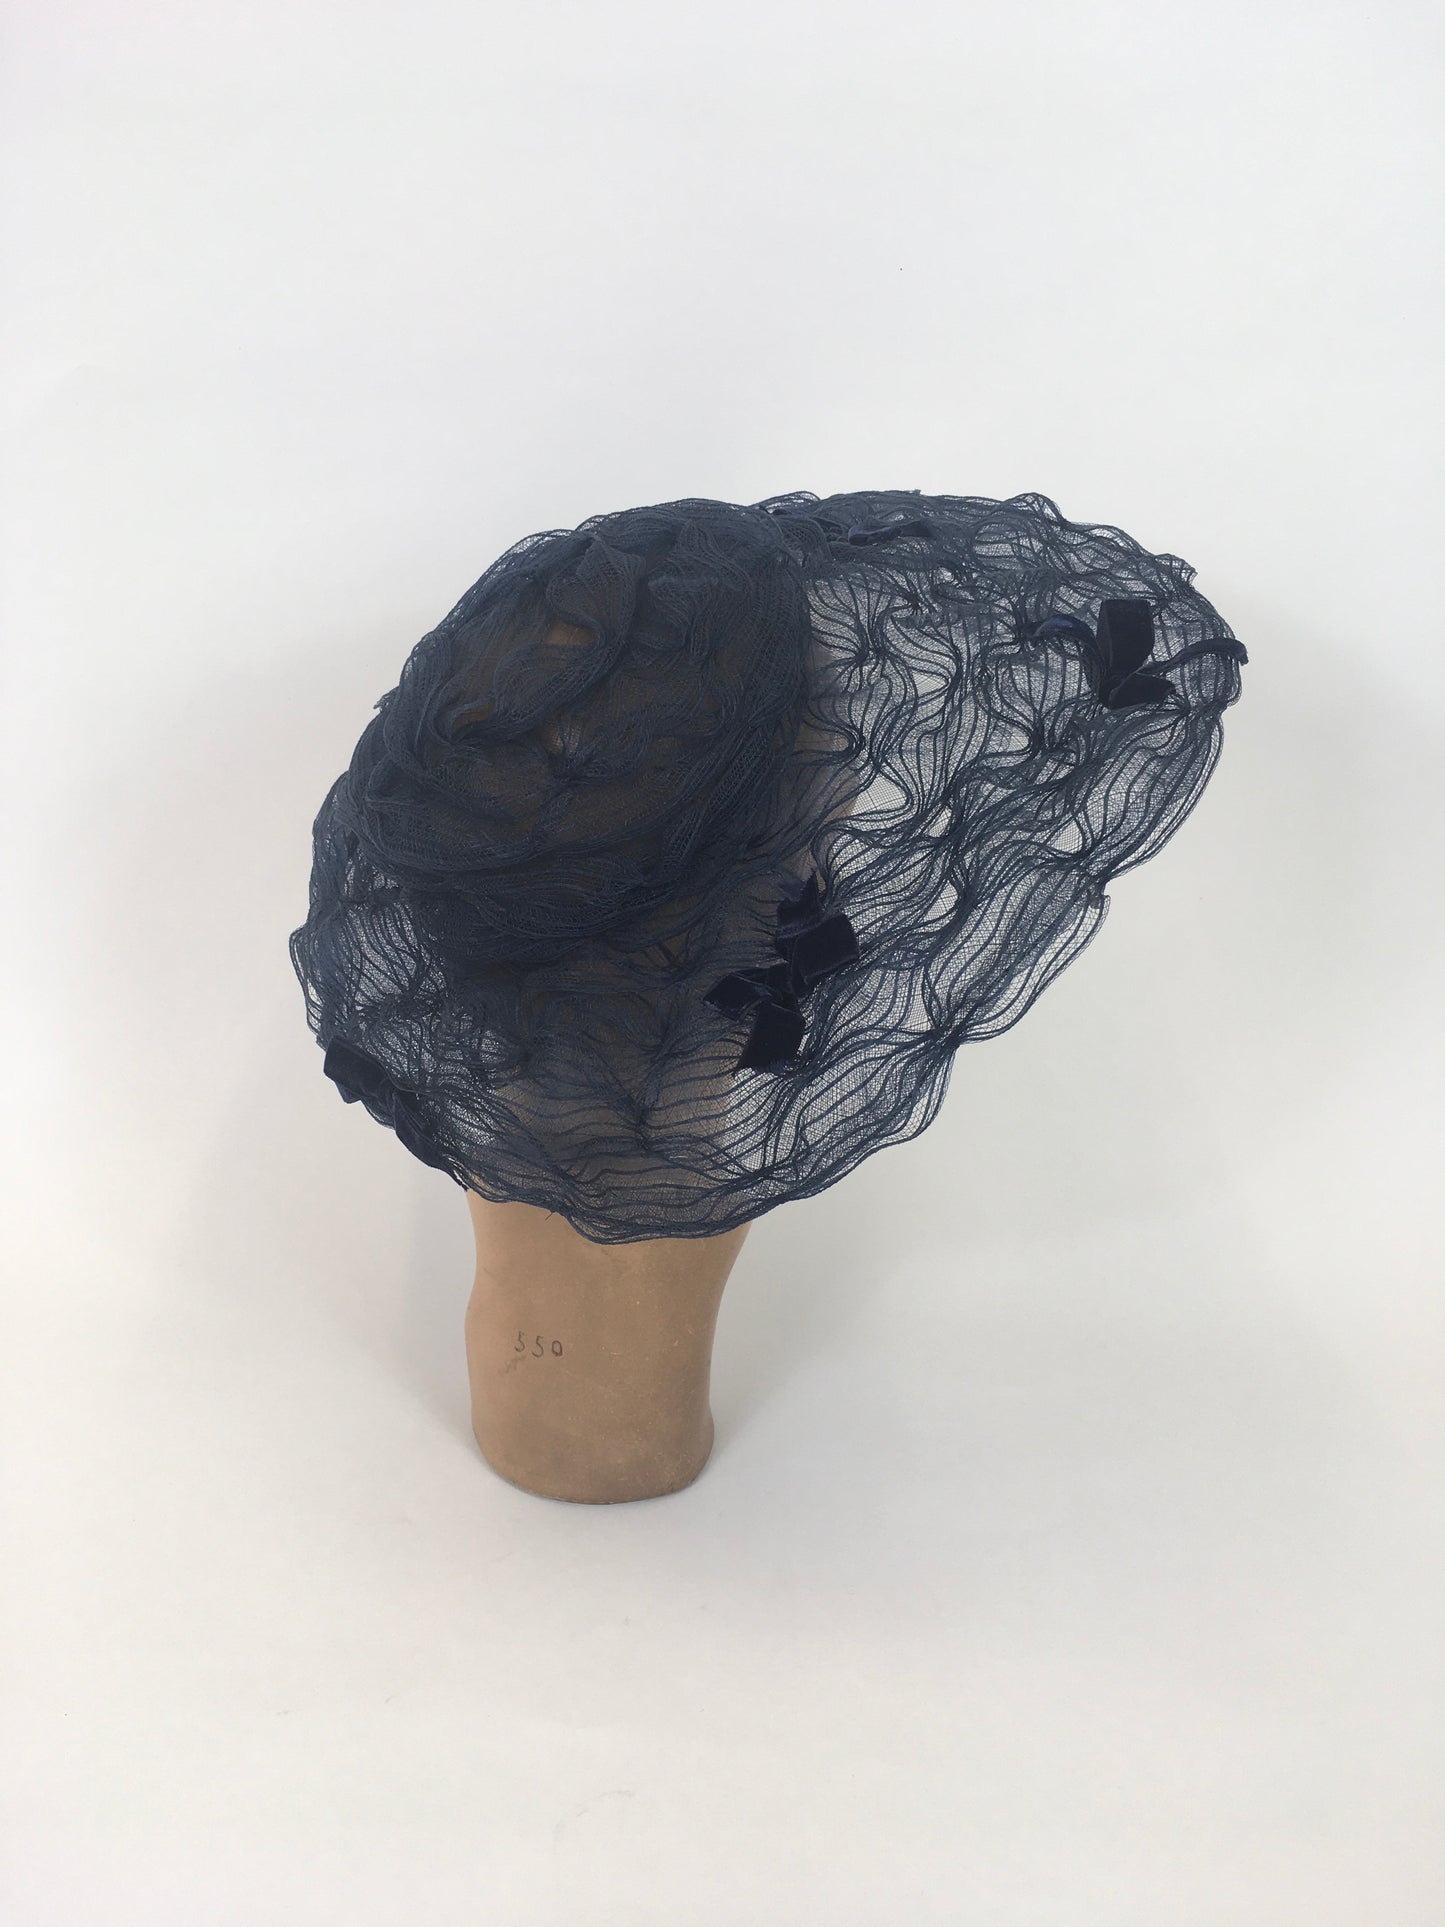 Original Early 1950’s Platter Hat - In A Sheer Navy with Velvet Ribbon Bows